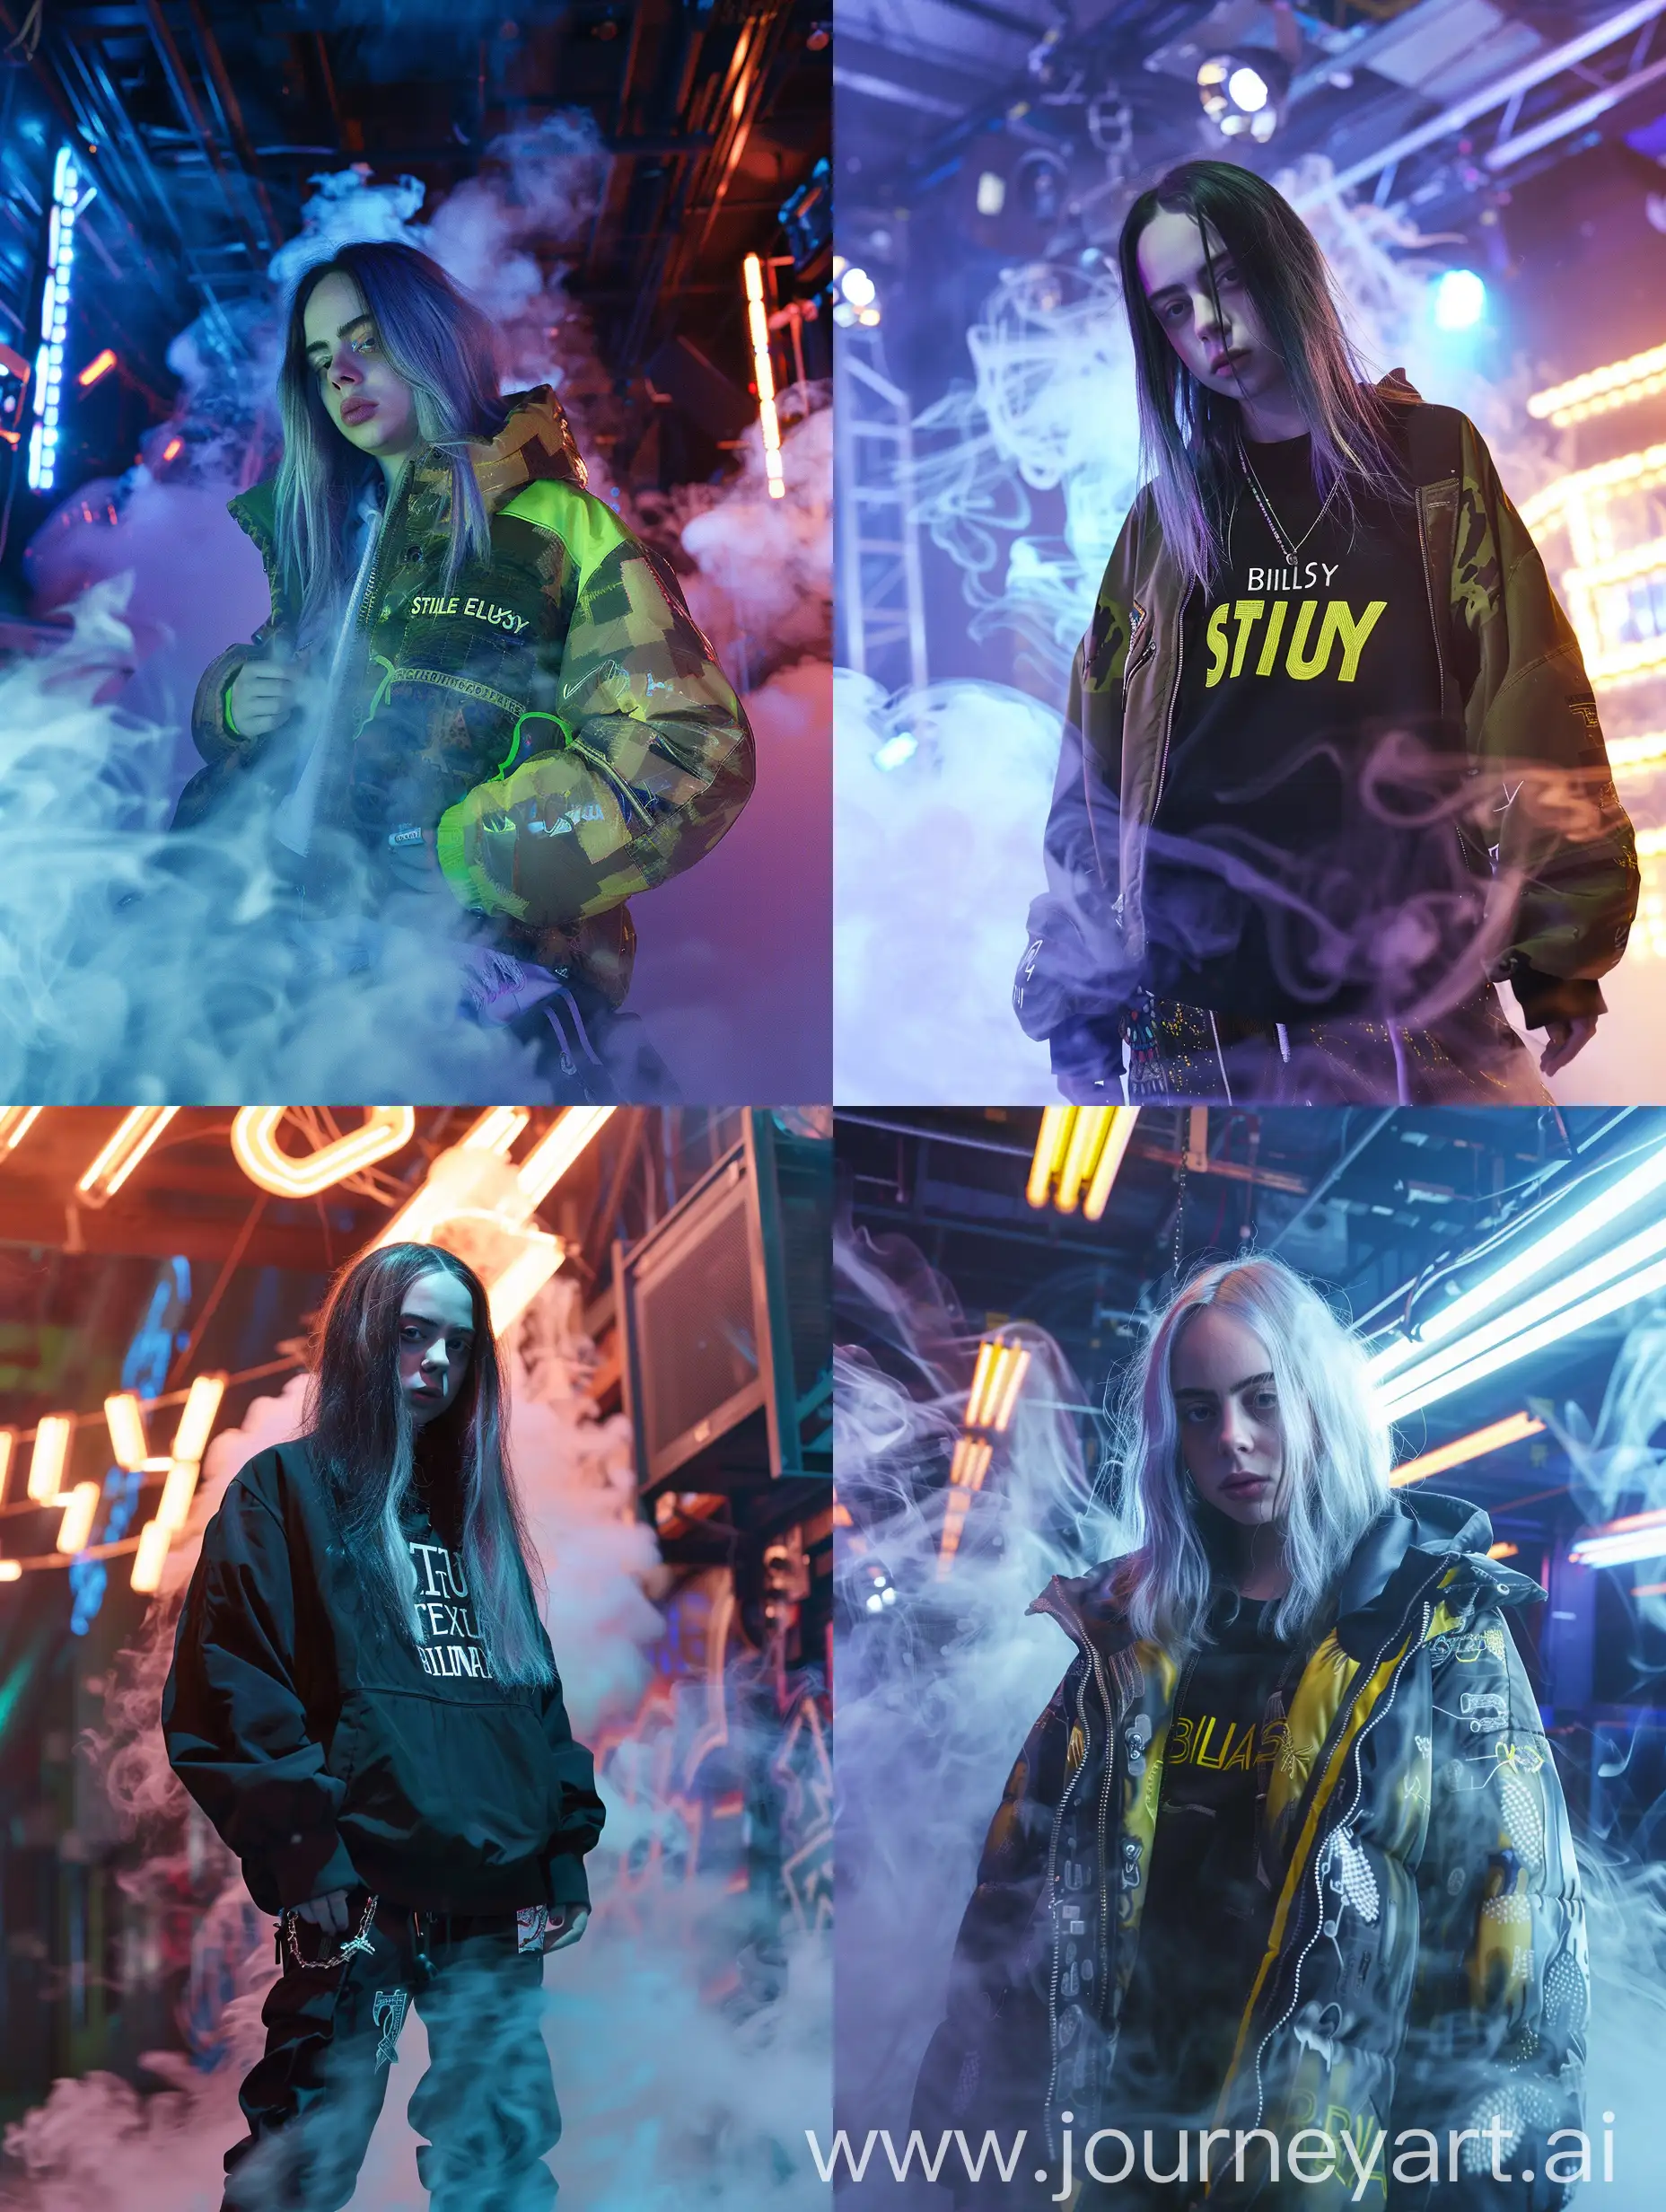 Realistic Photo Side Front Billie Eilish x RENA Streetwear: Amidst the pulsating lights of an underground club, Billie Eilish embodies downtown cool and futuristic allure. Dynamic photography captures the surrealism of Stussy streetwear in motion, with hyper-realistic details like embroidery zoom and inflatable technical textile. The scene is enveloped in swirling smoke, showcasing Eilish's edgy attitude and effortless style.